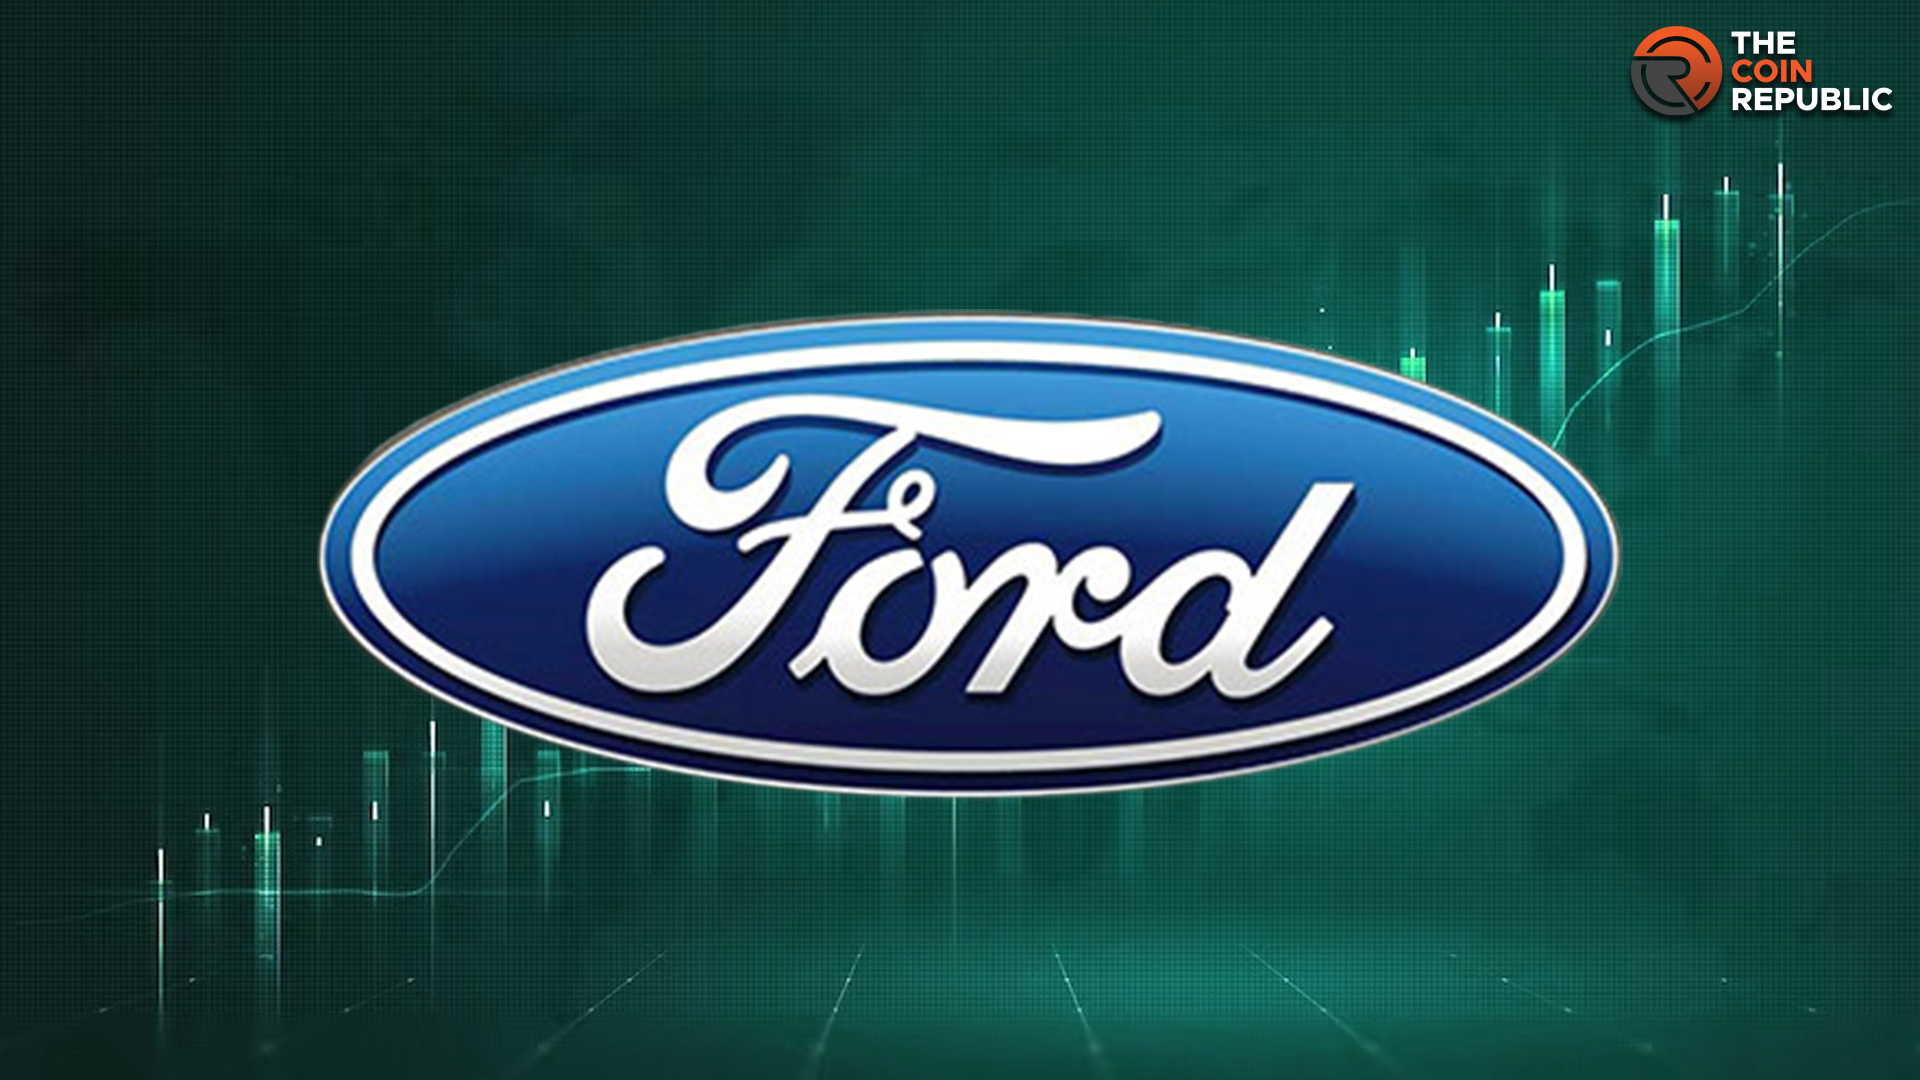 Ford Stock (NYSE: F): F Stock fell 8% In Aug, Sell off continues